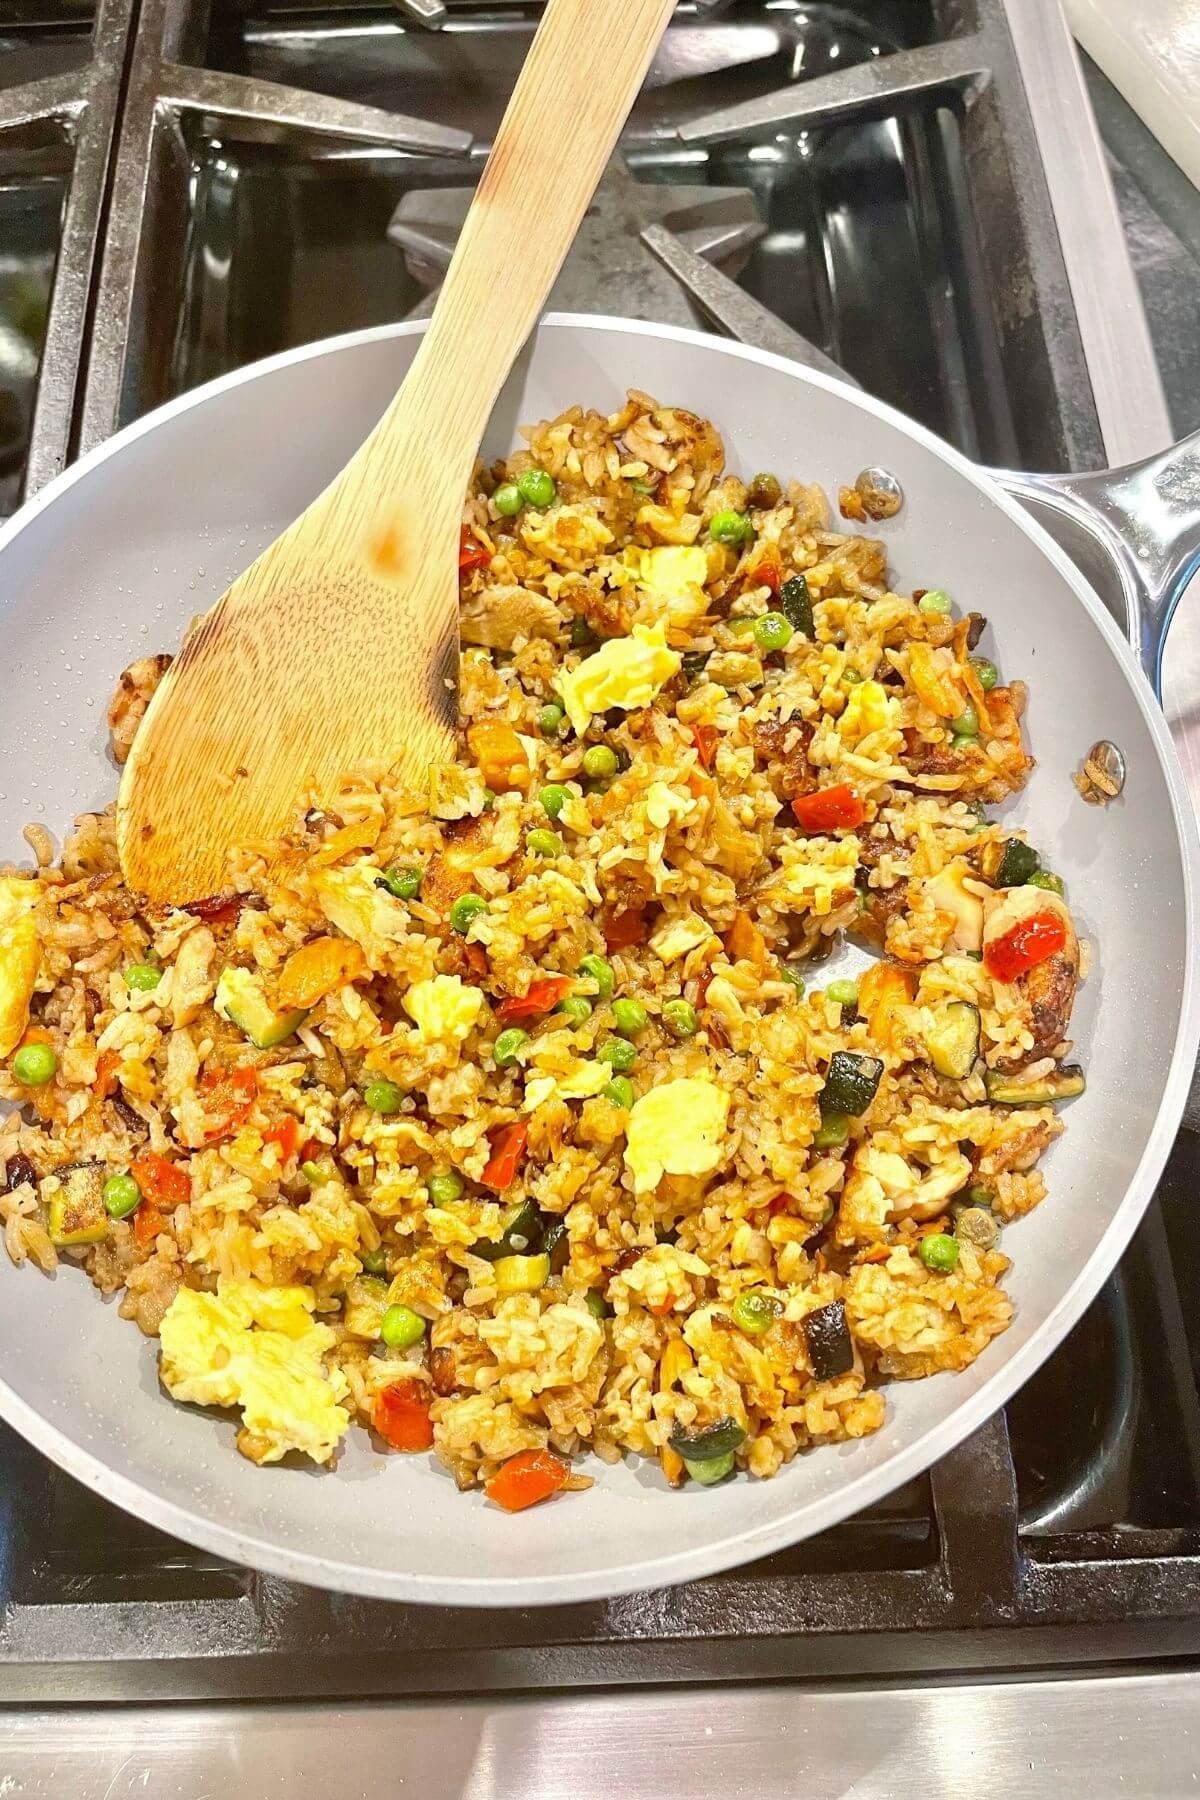 Making fried rice in Caraway skillet.